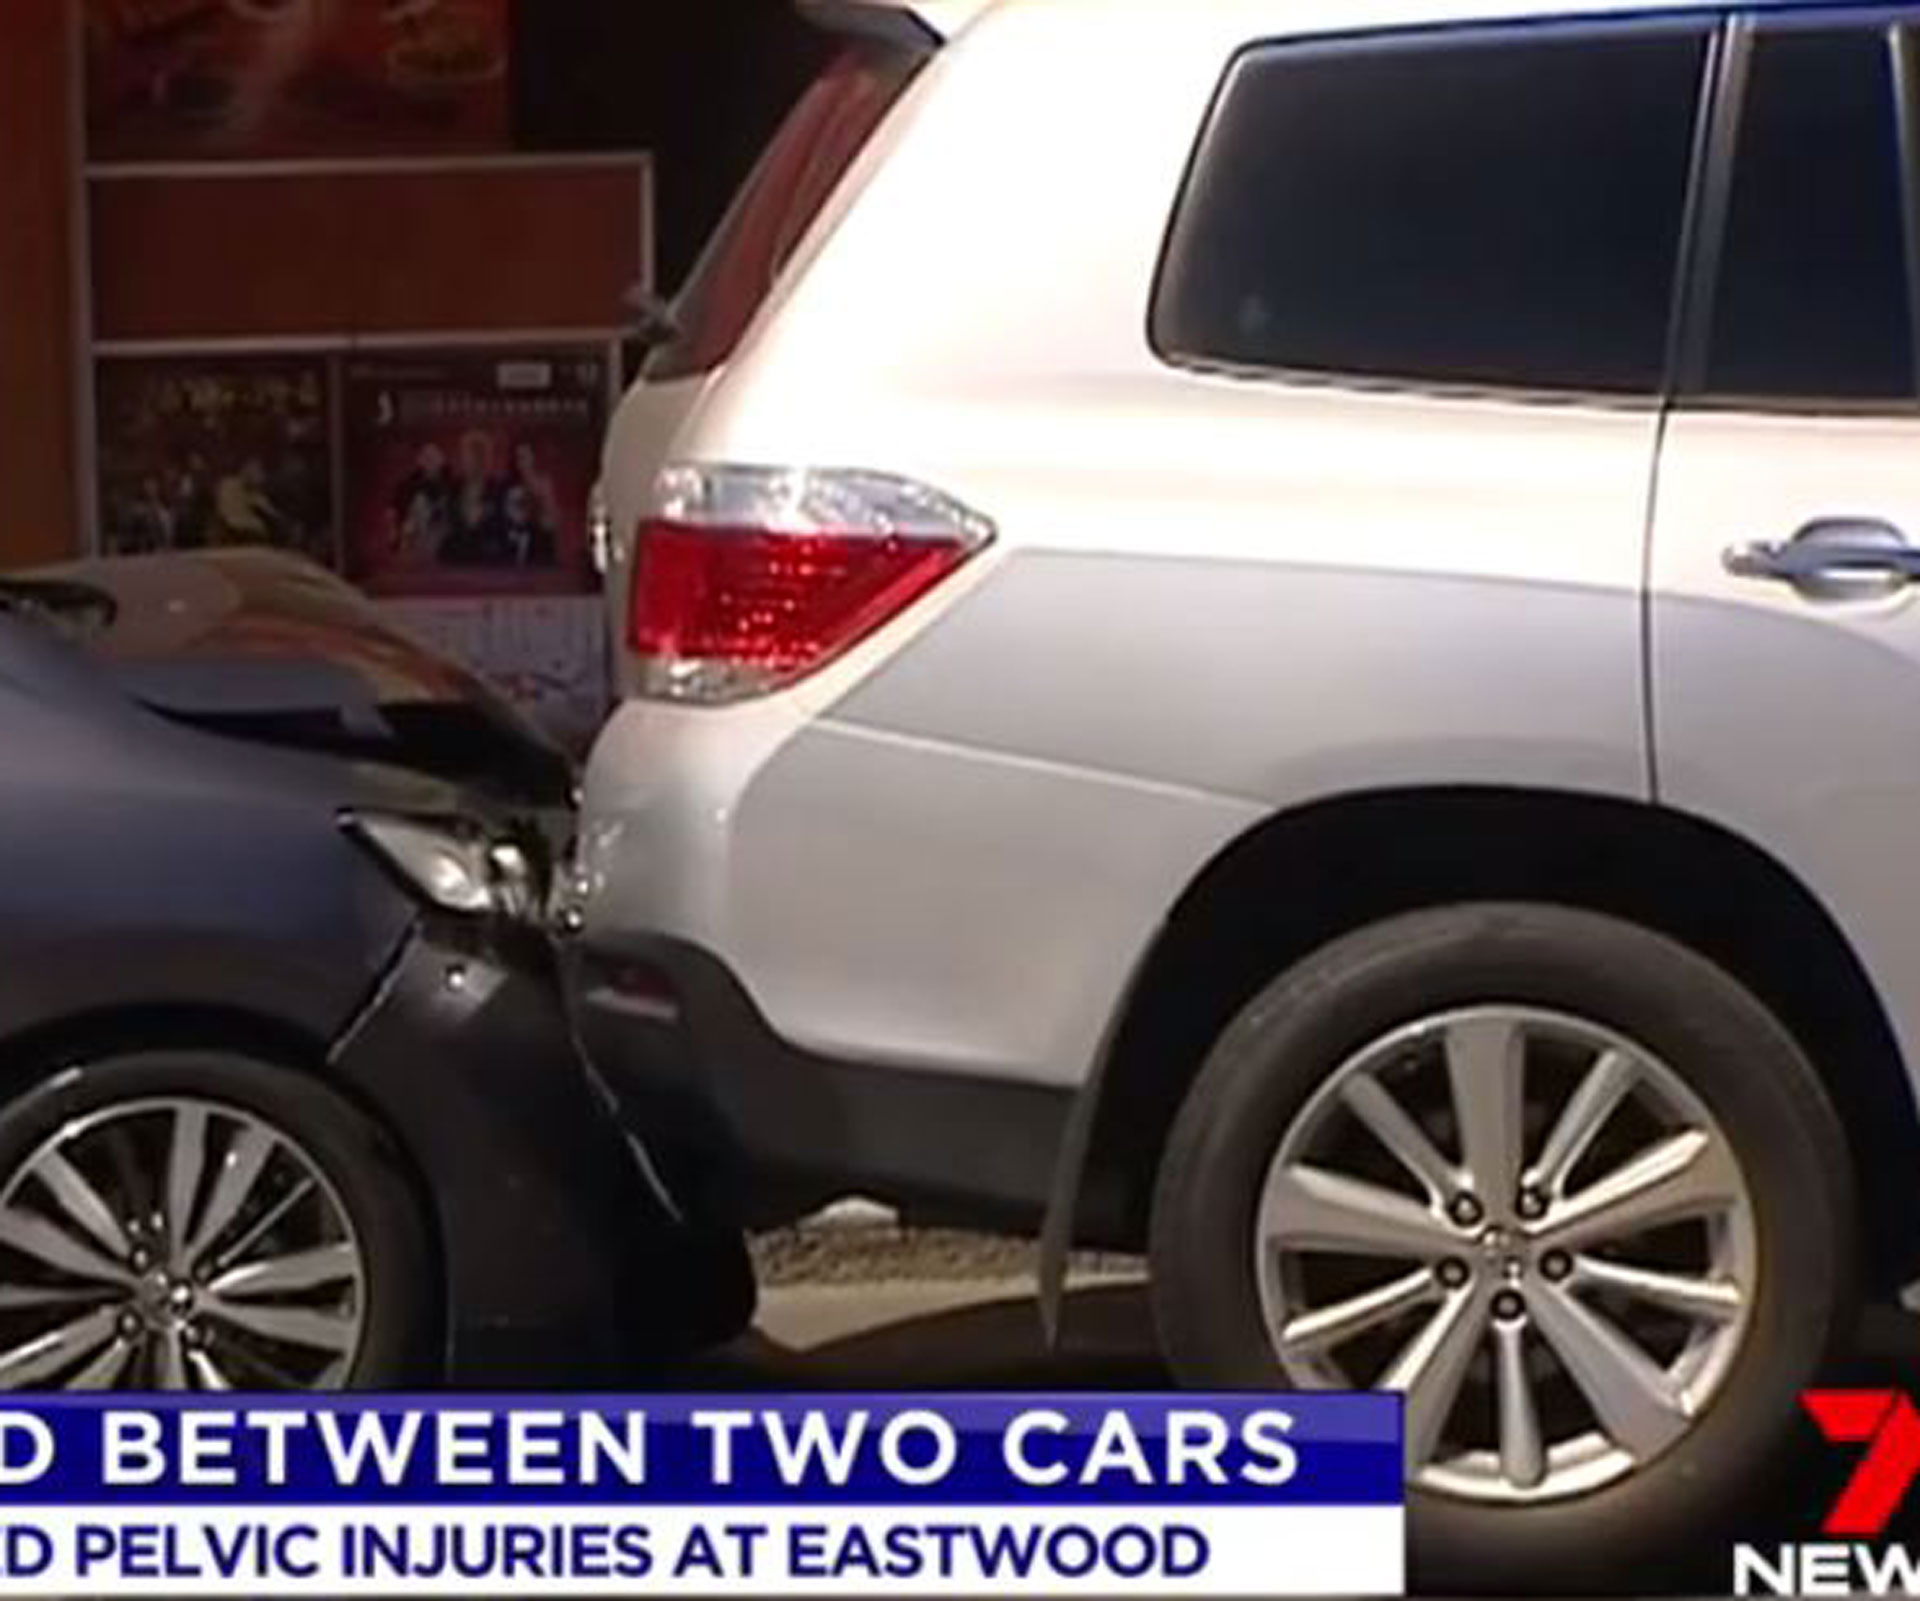 Sydney girl, 6, crushed between cars – driver allegedly 6 times over limit